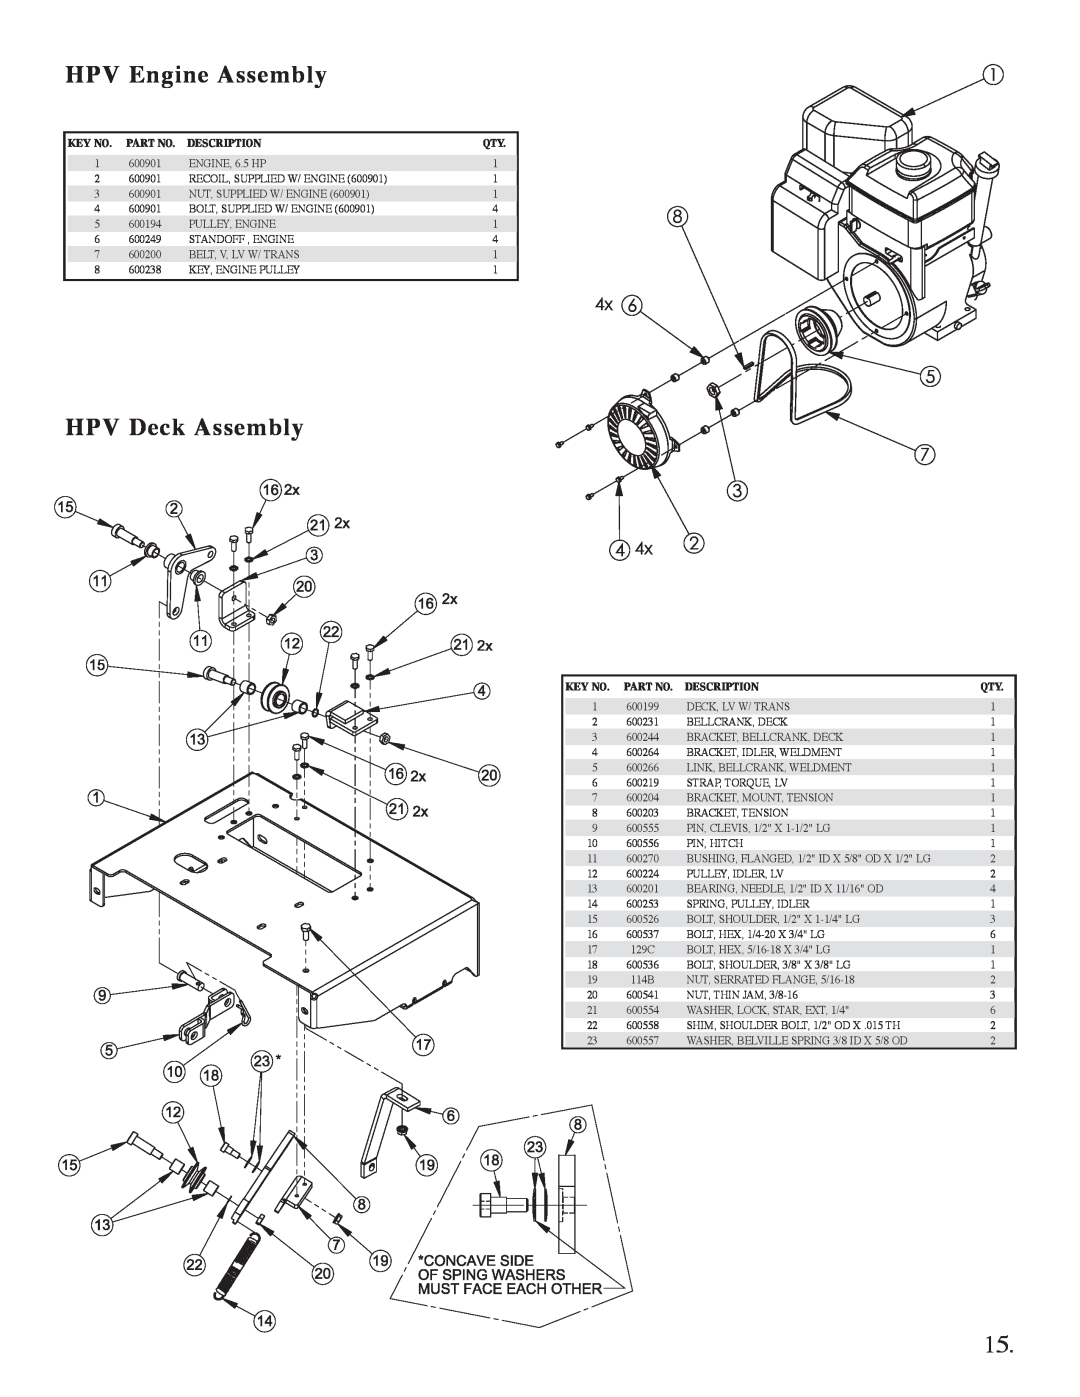 Briggs & Stratton 5621, 5631 manual HPV Engine Assembly, HPV Deck Assembly, Description 